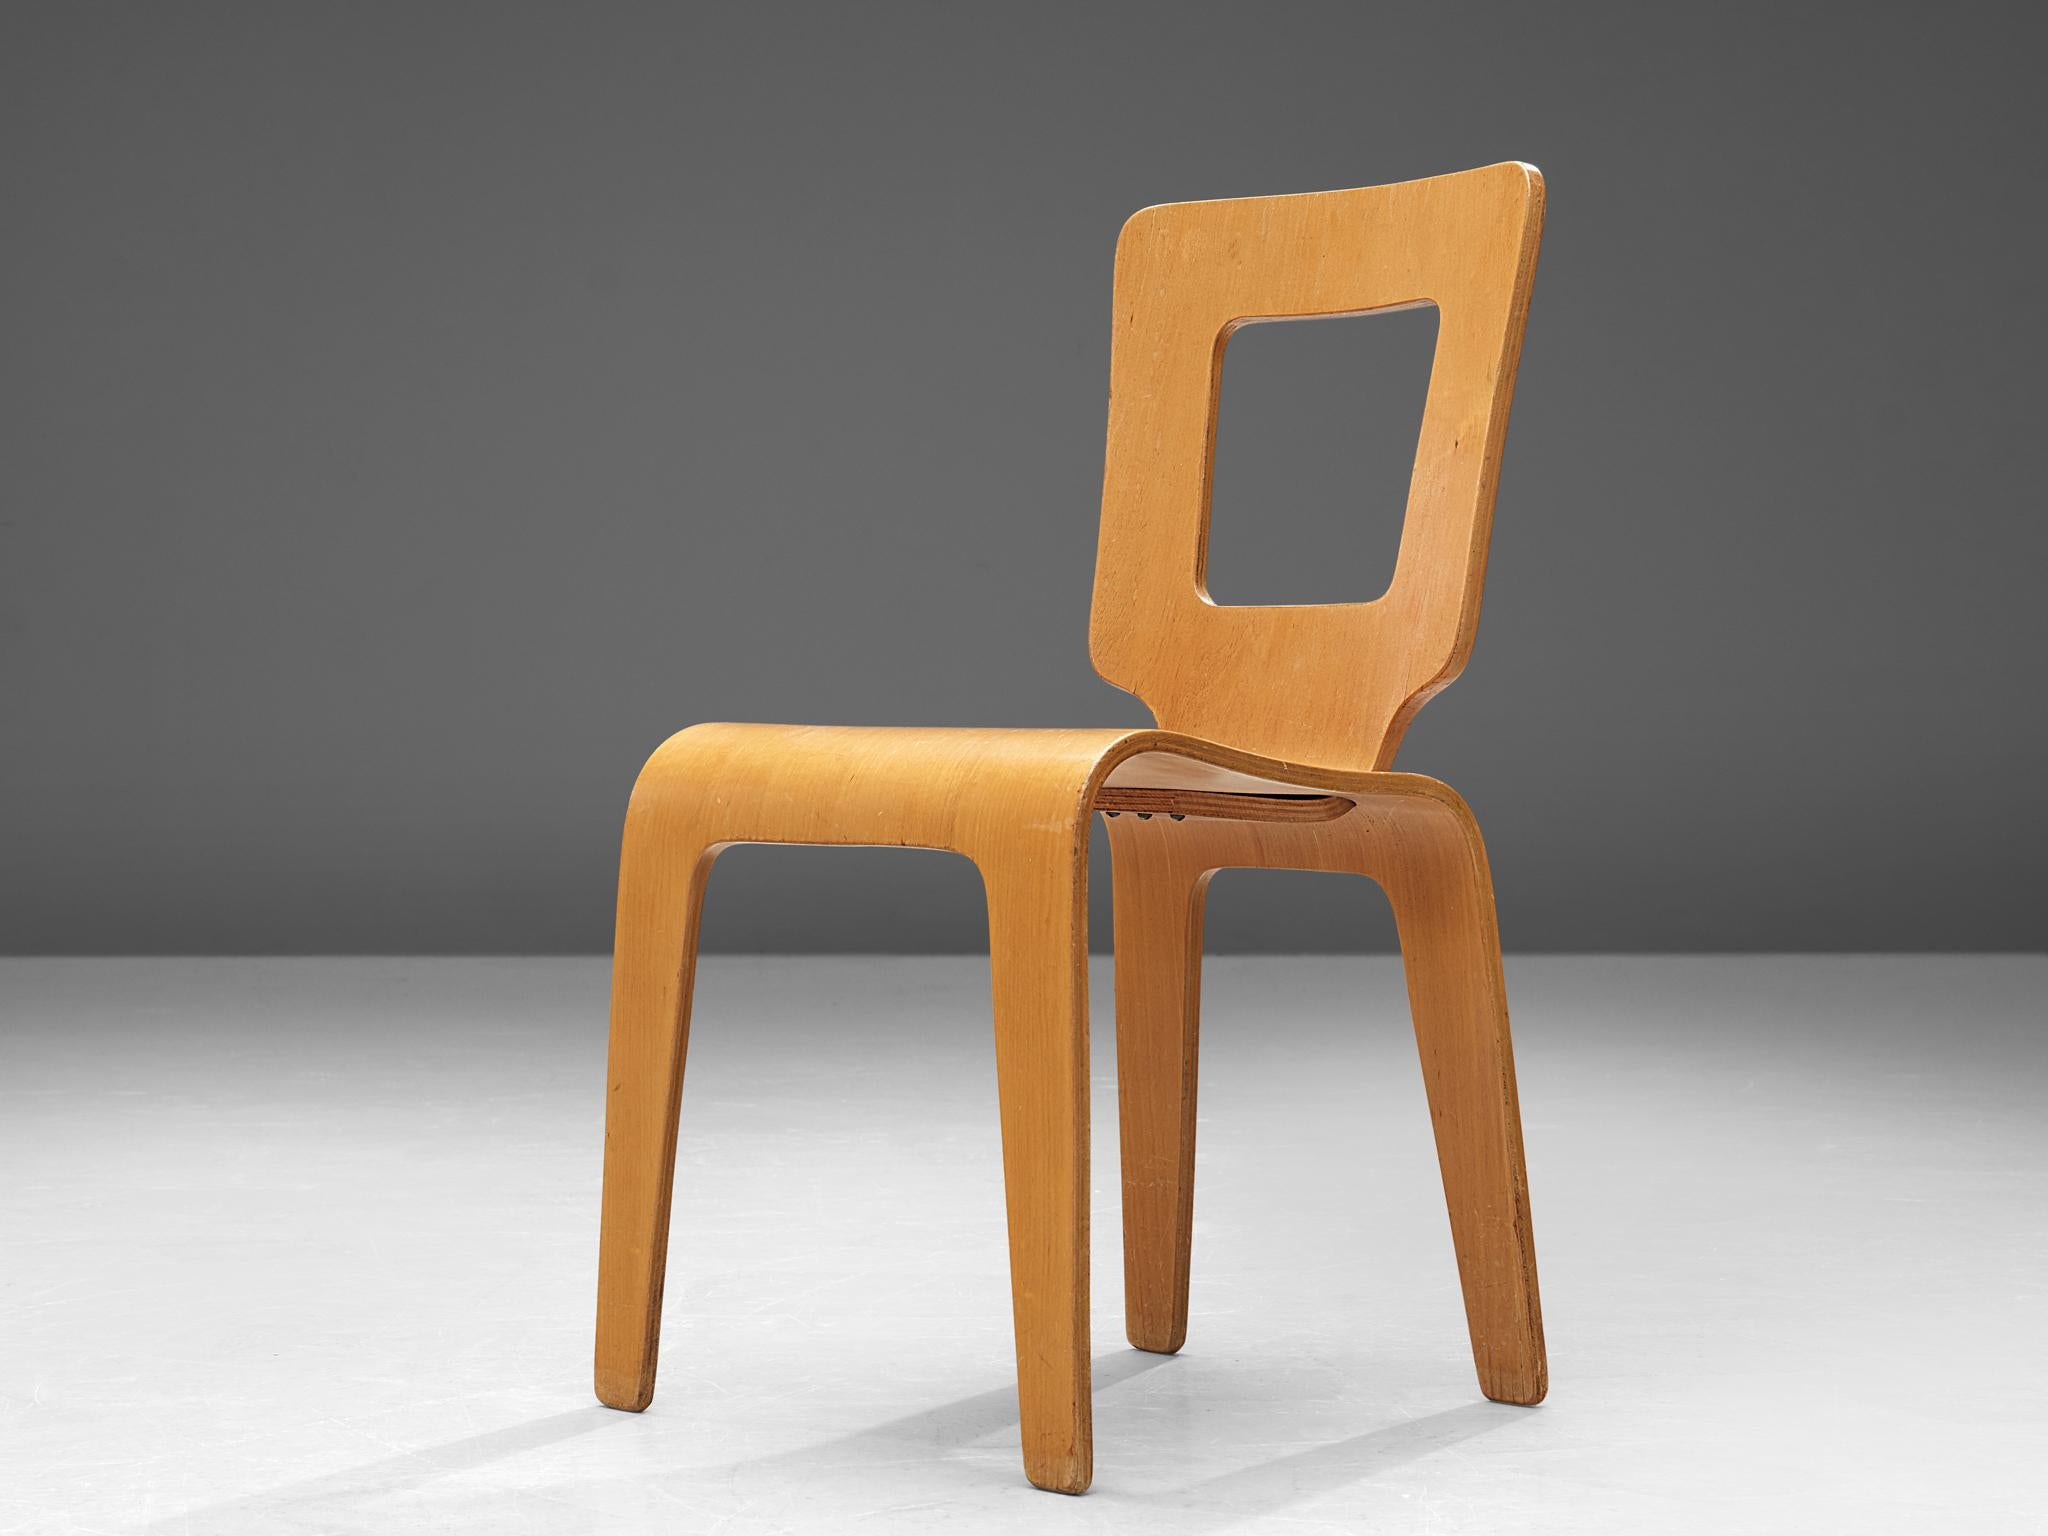 Herbert von Thaden and Donald Lewis Jordan for Thaden-Jordan Furniture Company, dining chair, model 102, plywood, United States, circa 1947 

This side chair has a splendid construction that epitomizes a simplistic, natural and timeless aesthetics.